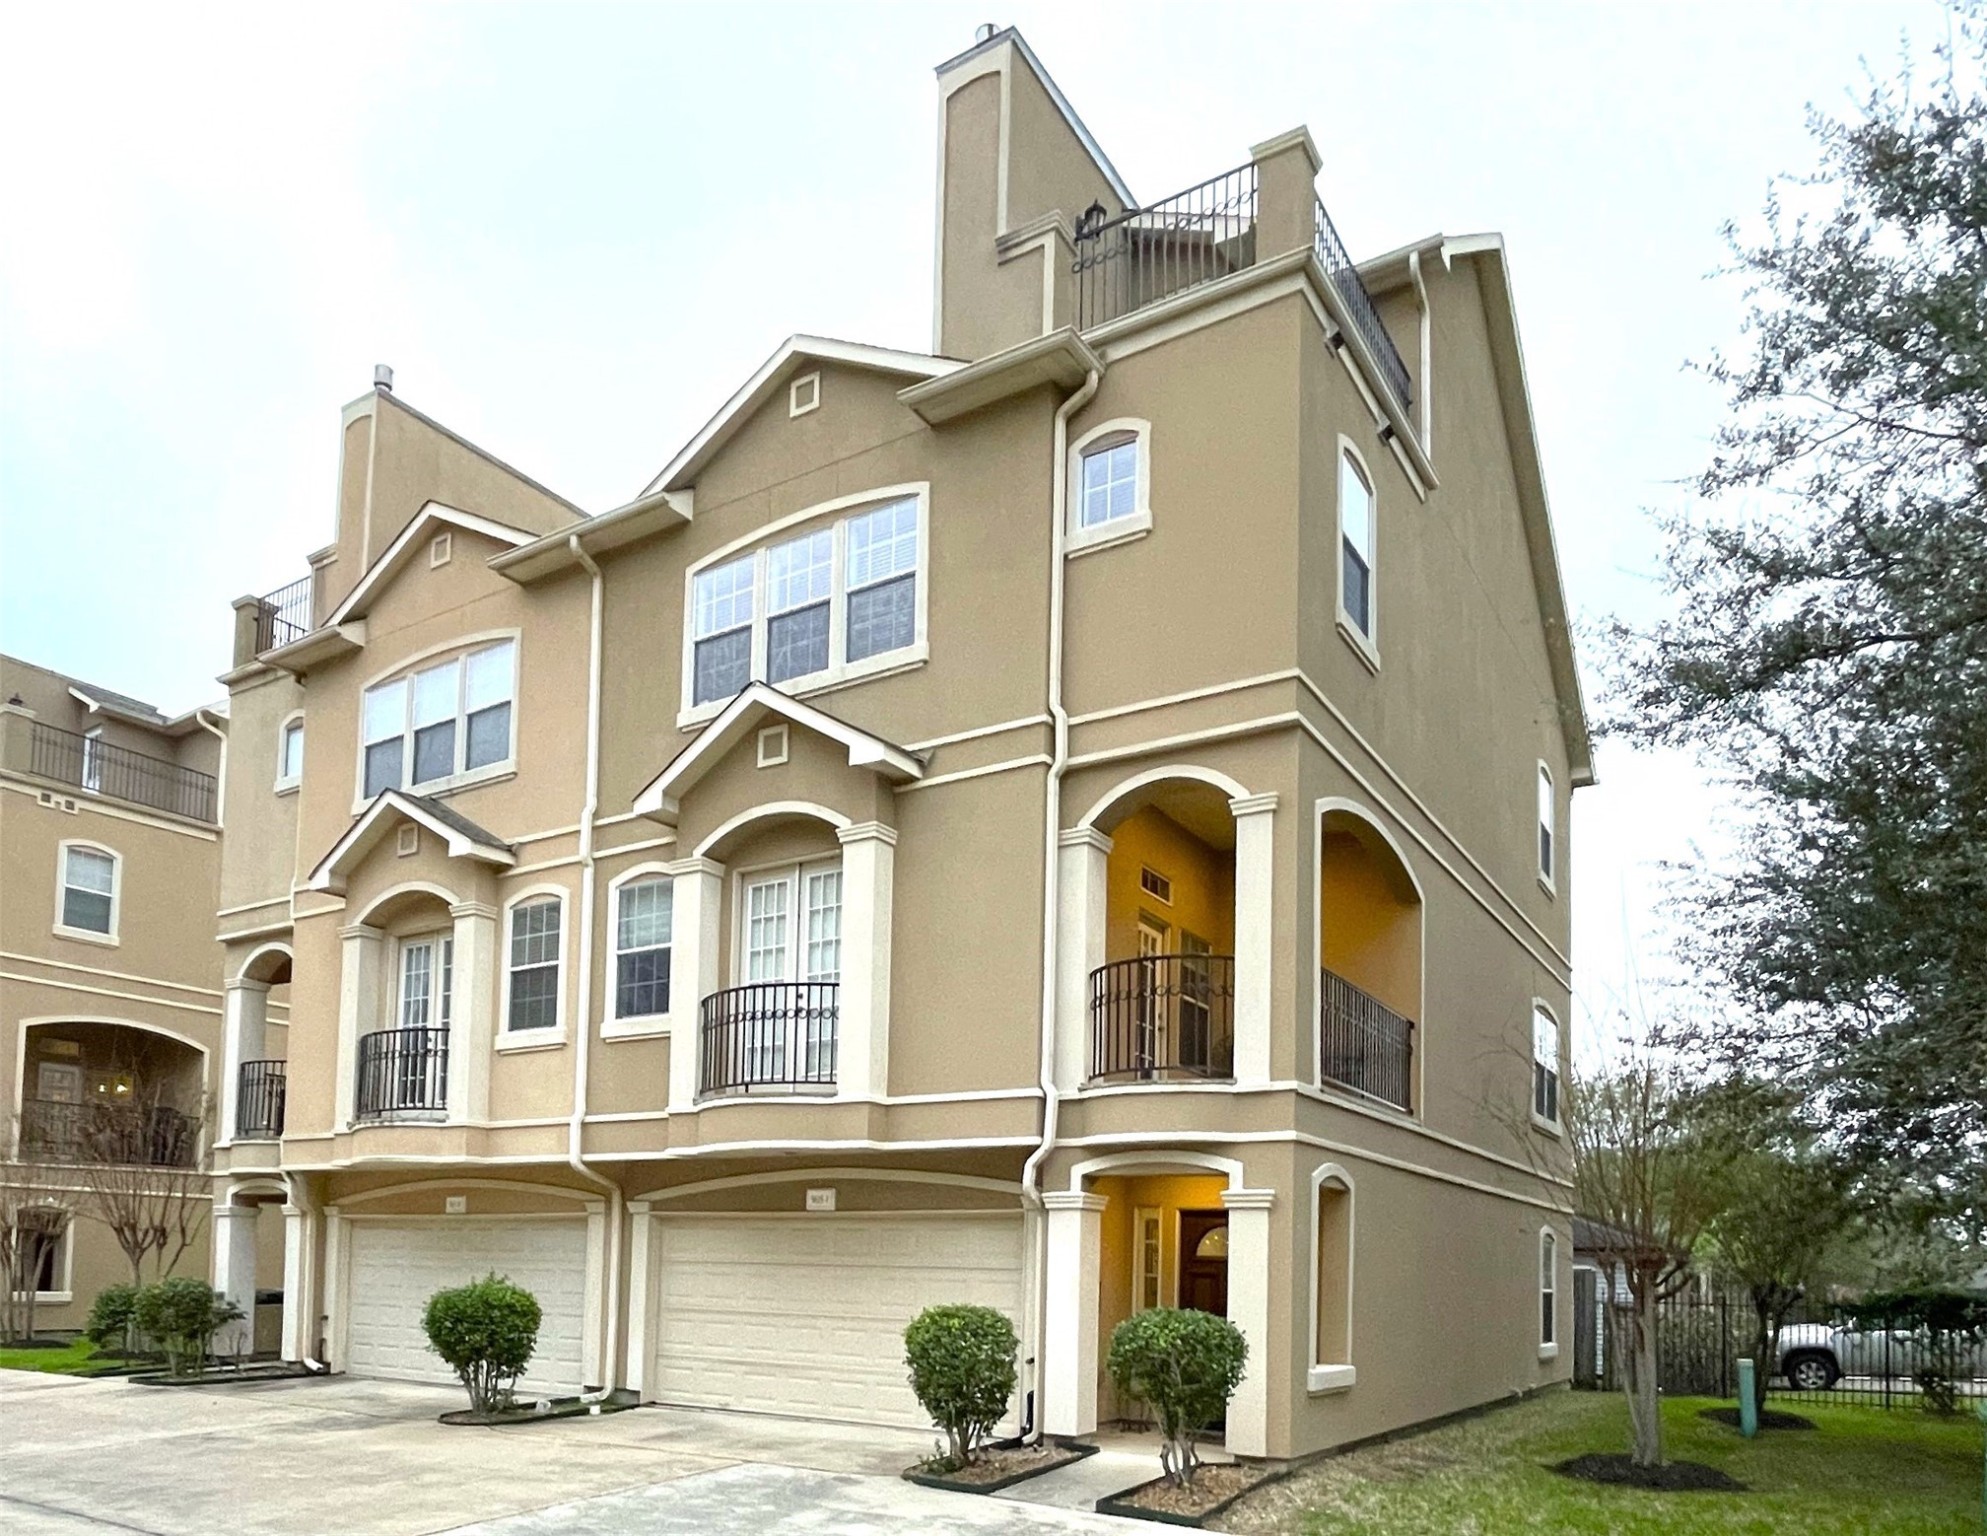 Welcome to 5615 Winsome Ln, Unit I, Houston TX 77057